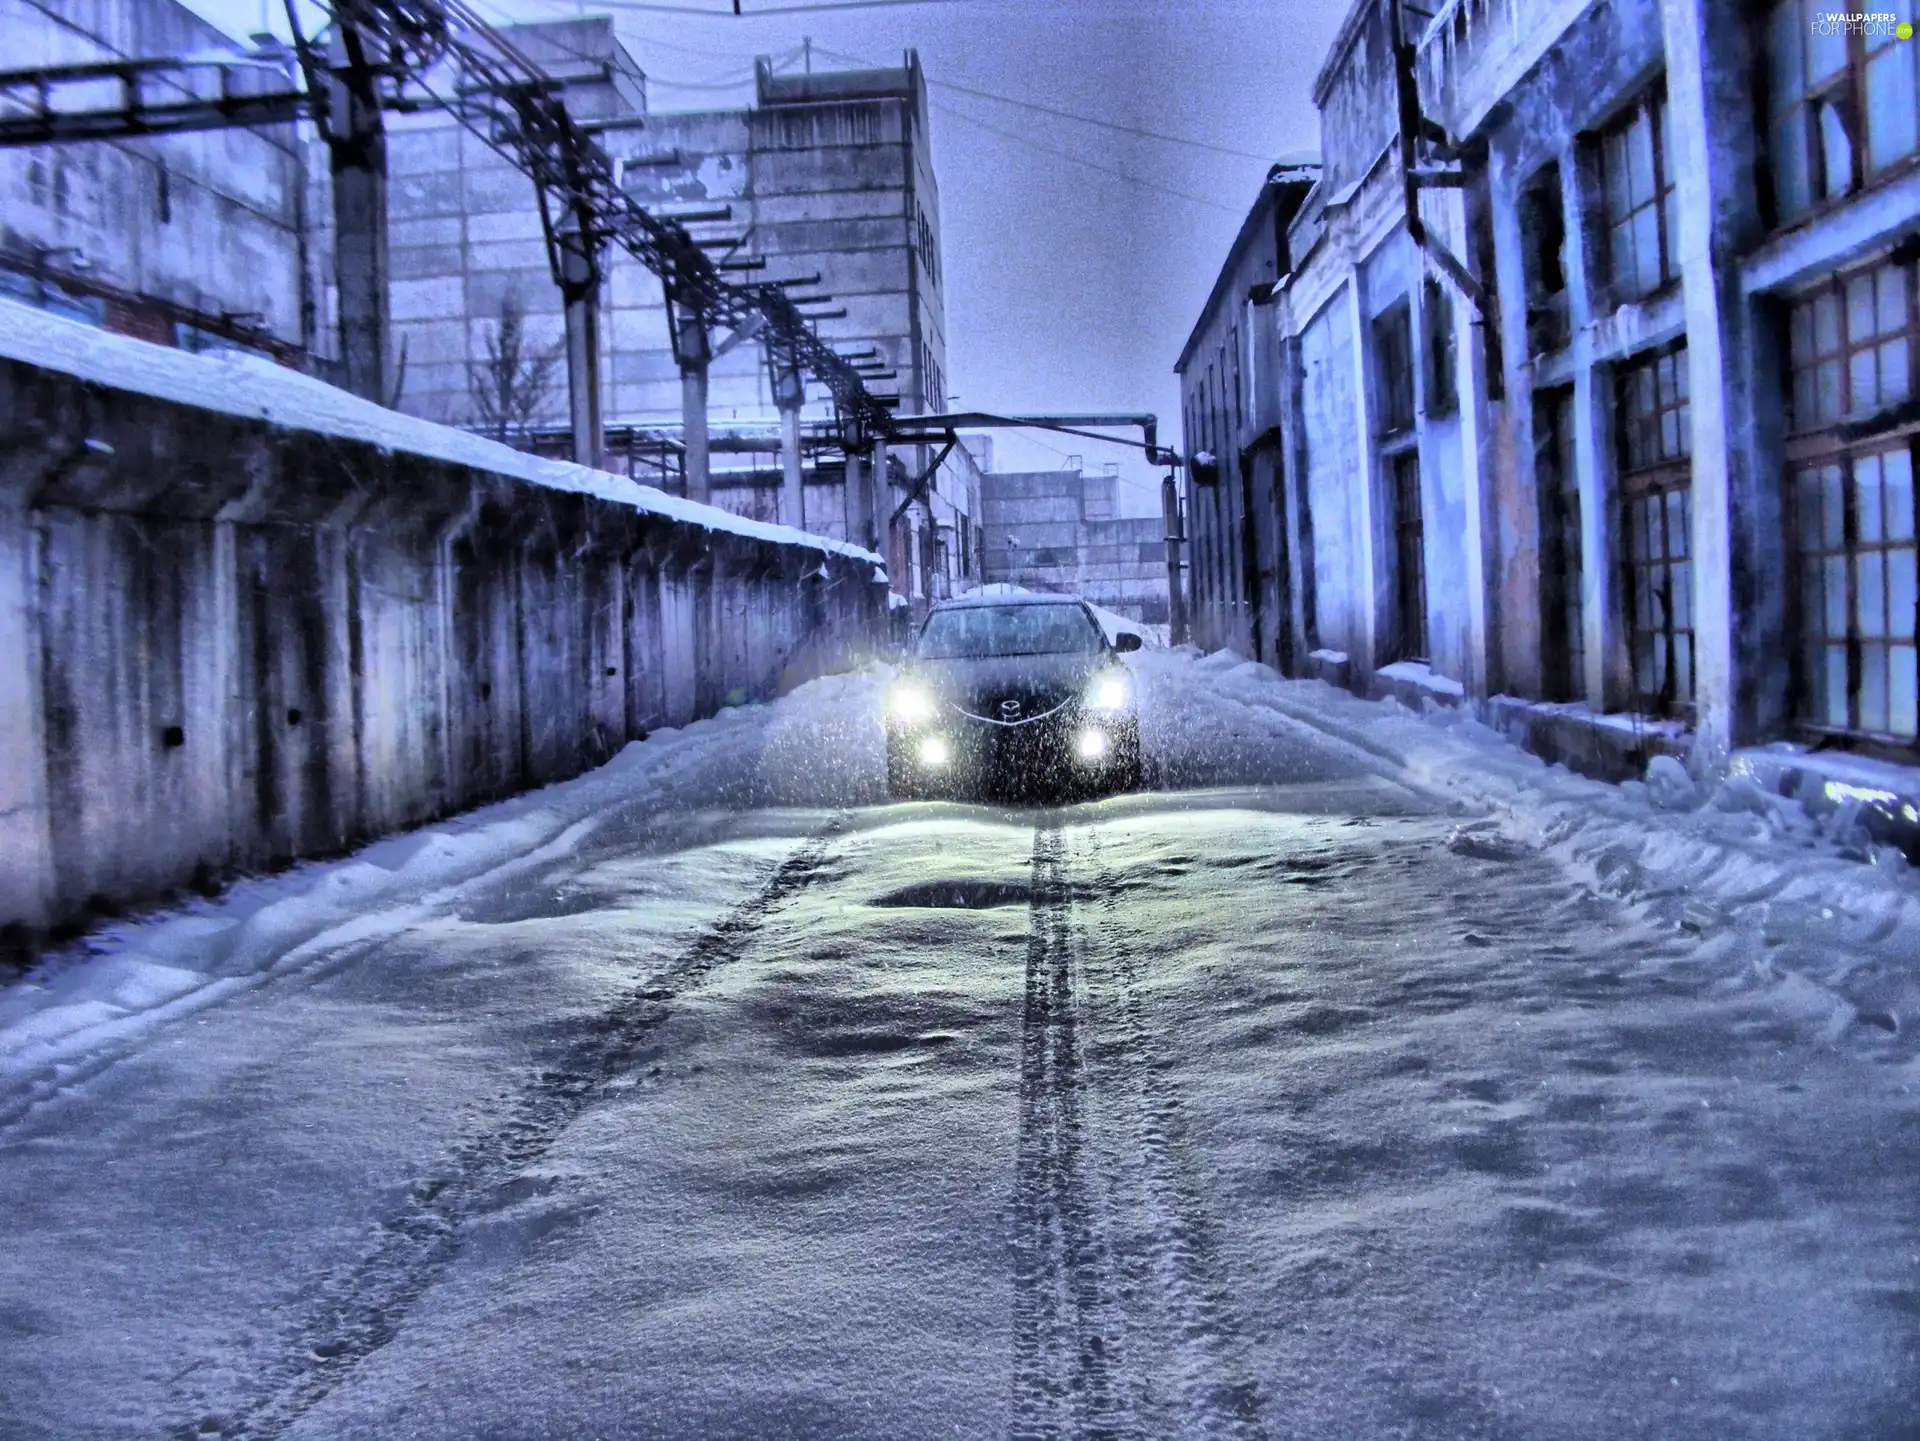 Street, Mazda, A snow-covered